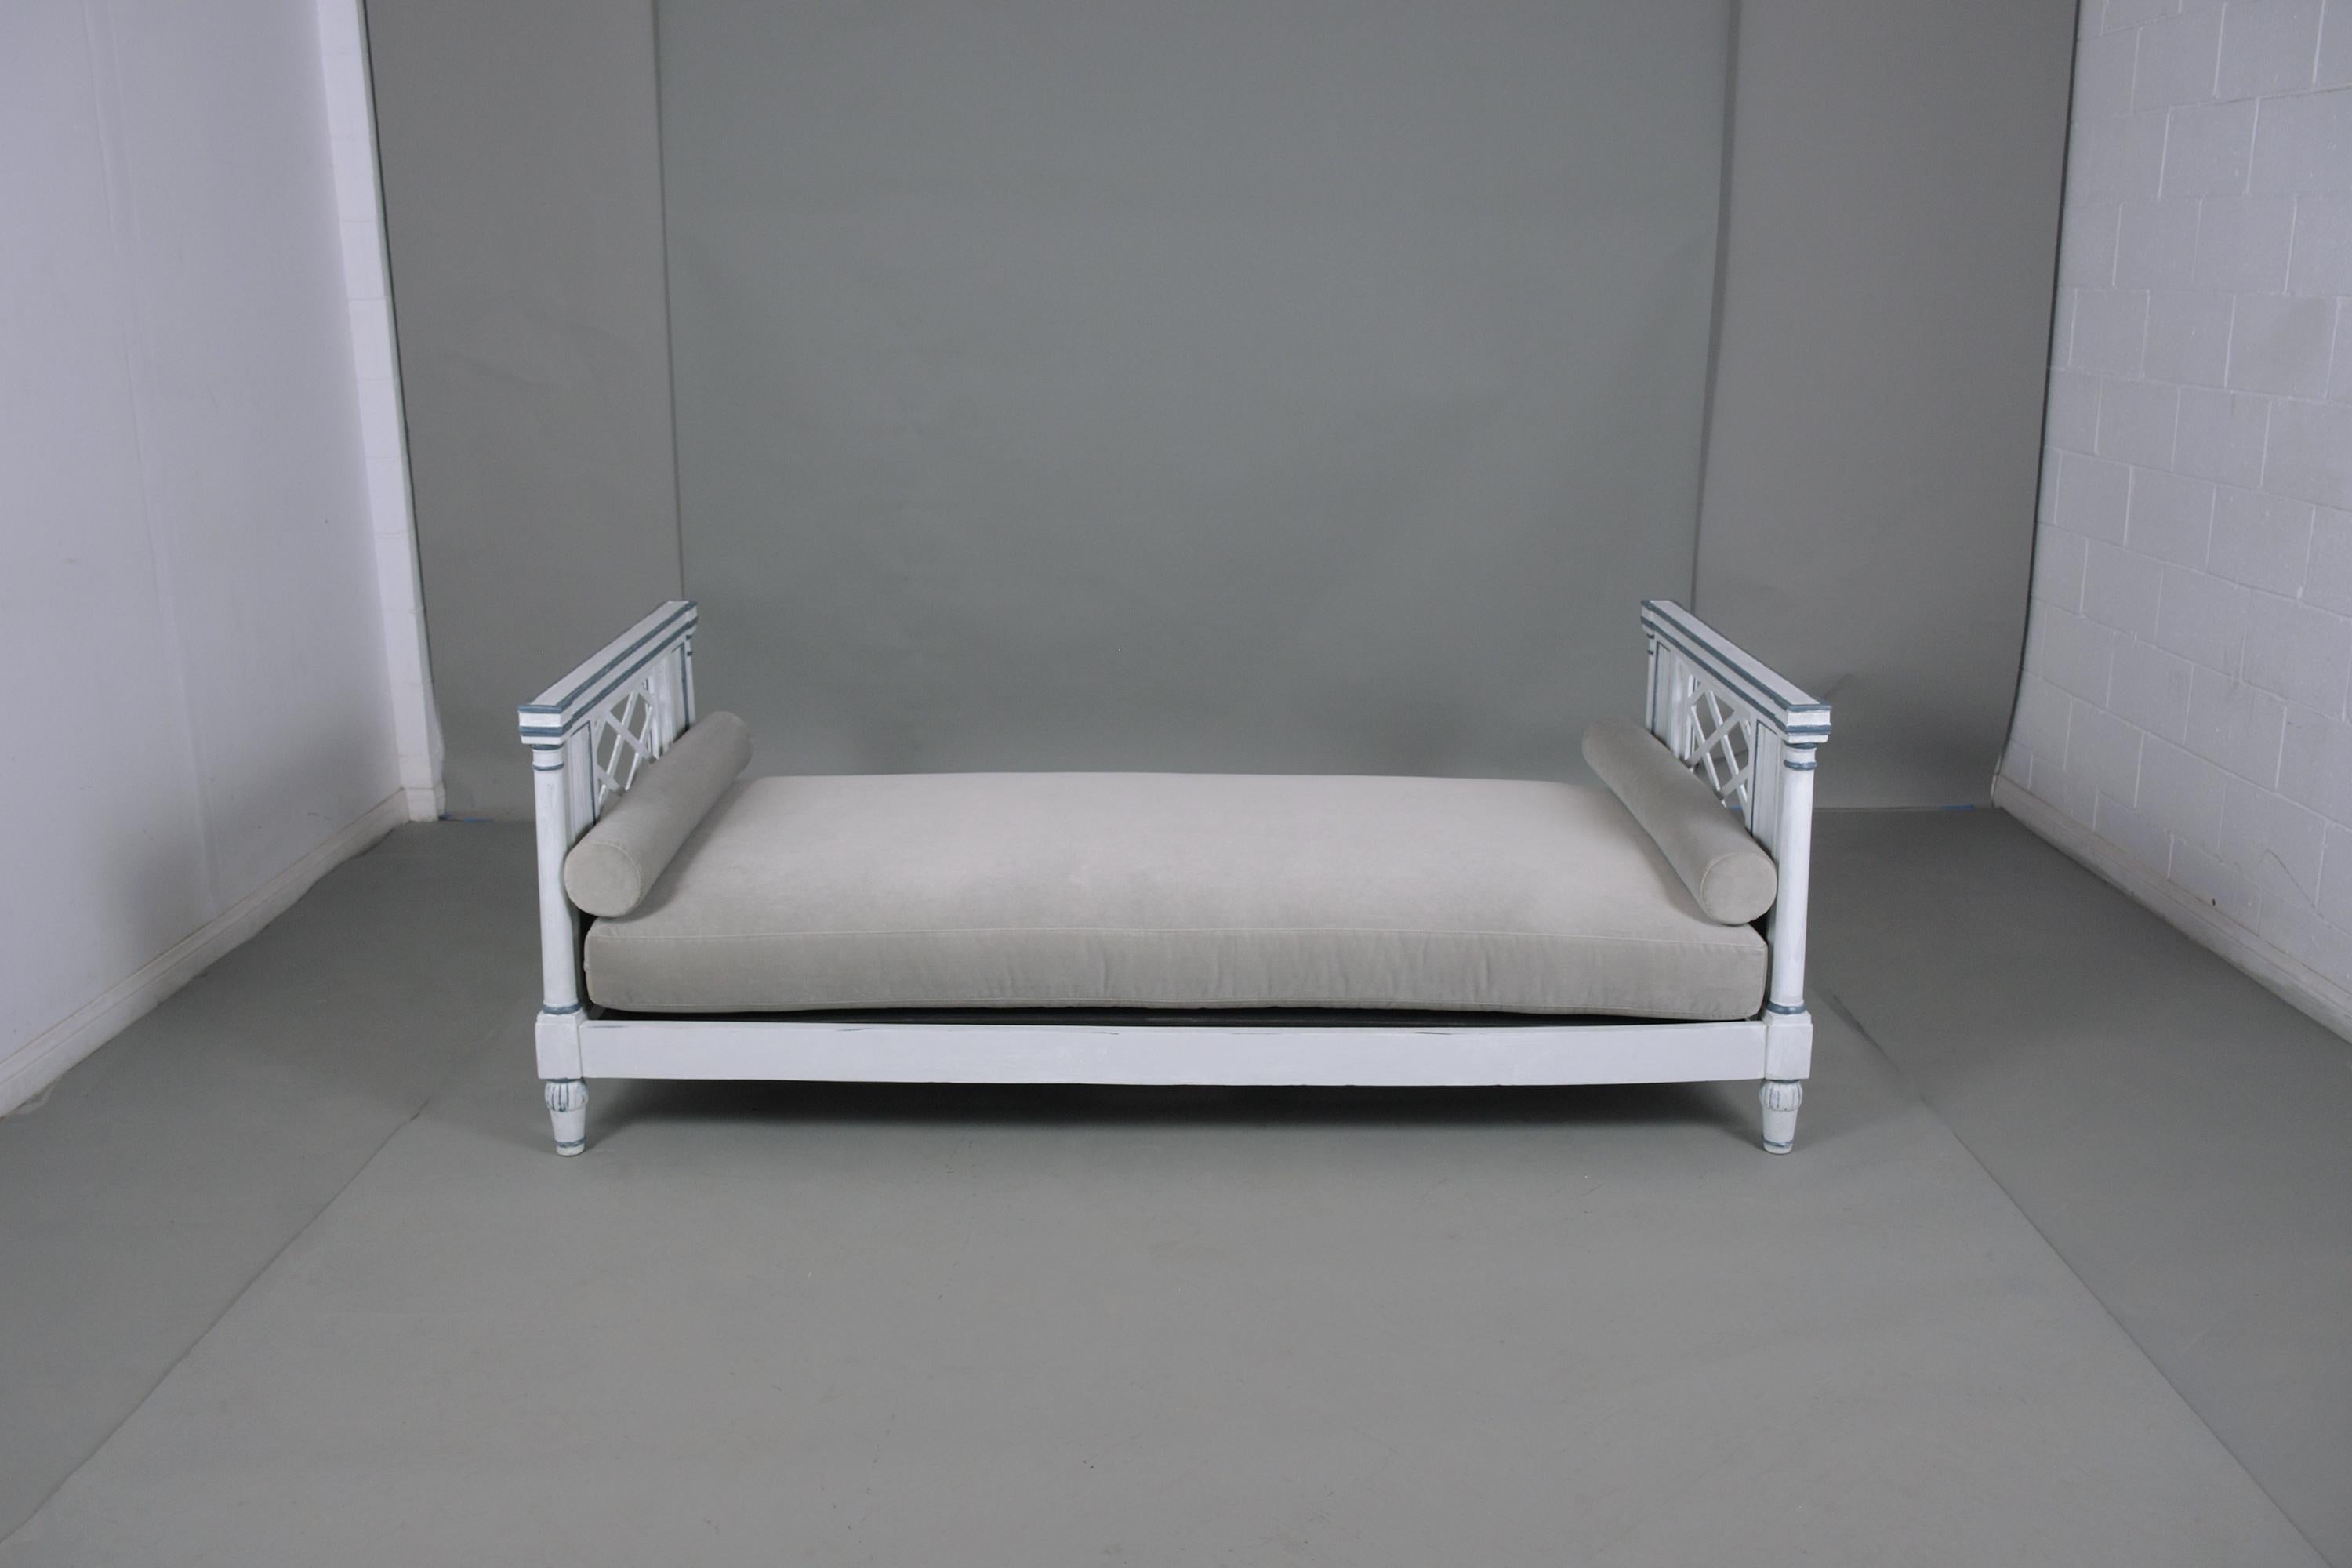 An extraordinary antique empire daybed is hand-crafted out of walnut and newly restored finished and upholstered by our professional craftsman team. This comfortable daybed has been newly painted in an oyster color & is accentuated with navy blue